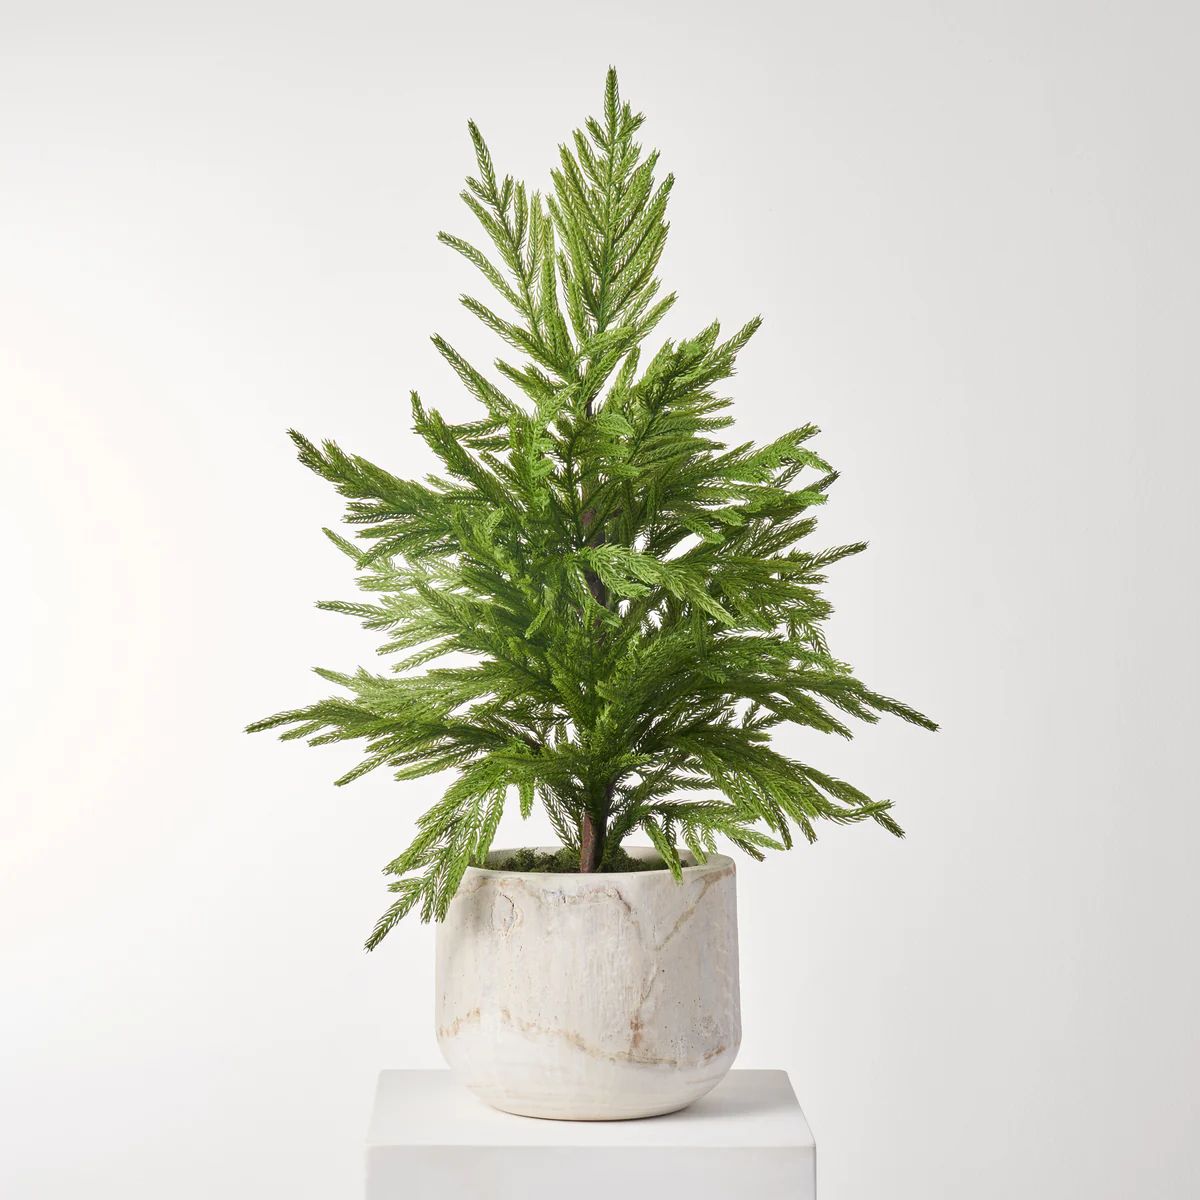 Real Touch Norfolk Pine Faux Tree In Potted in Natural Wood Planter Bowl | Darby Creek Trading